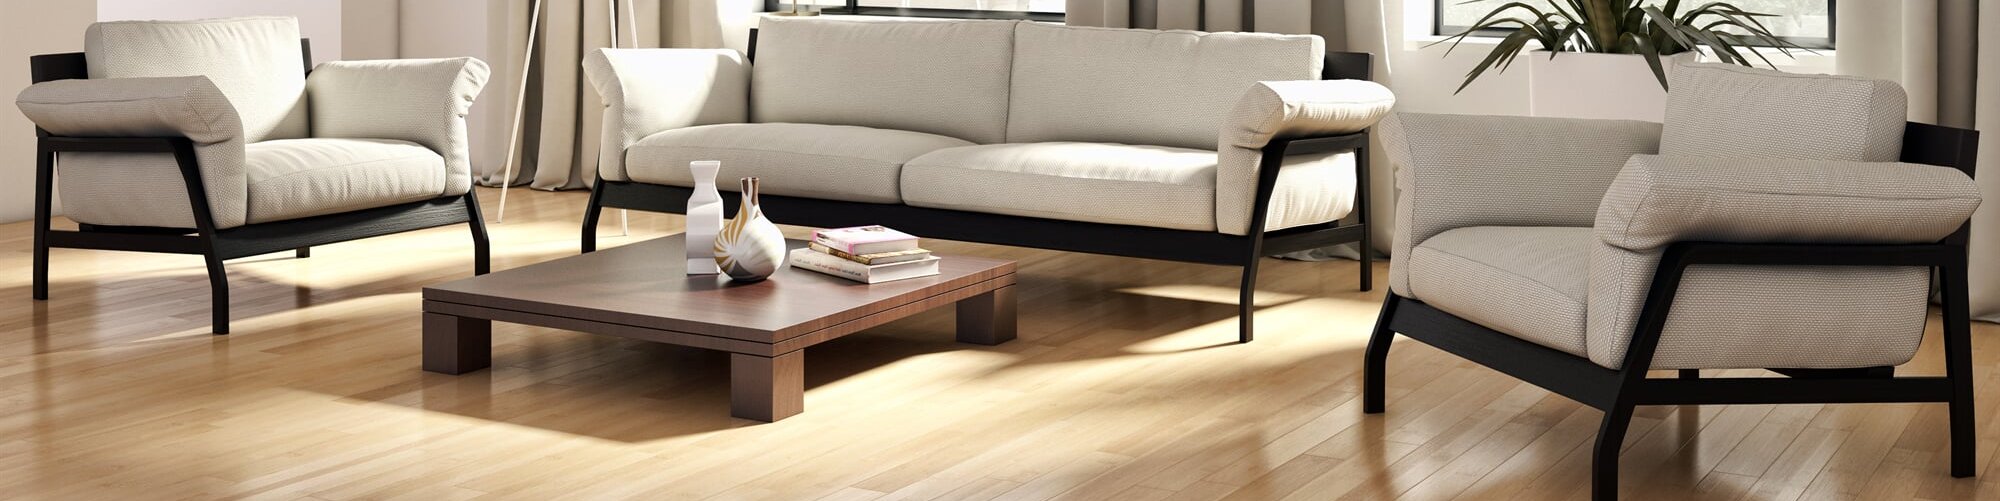 Find more about our hardwood flooring services in OH area, at Genoa Custom Interiors